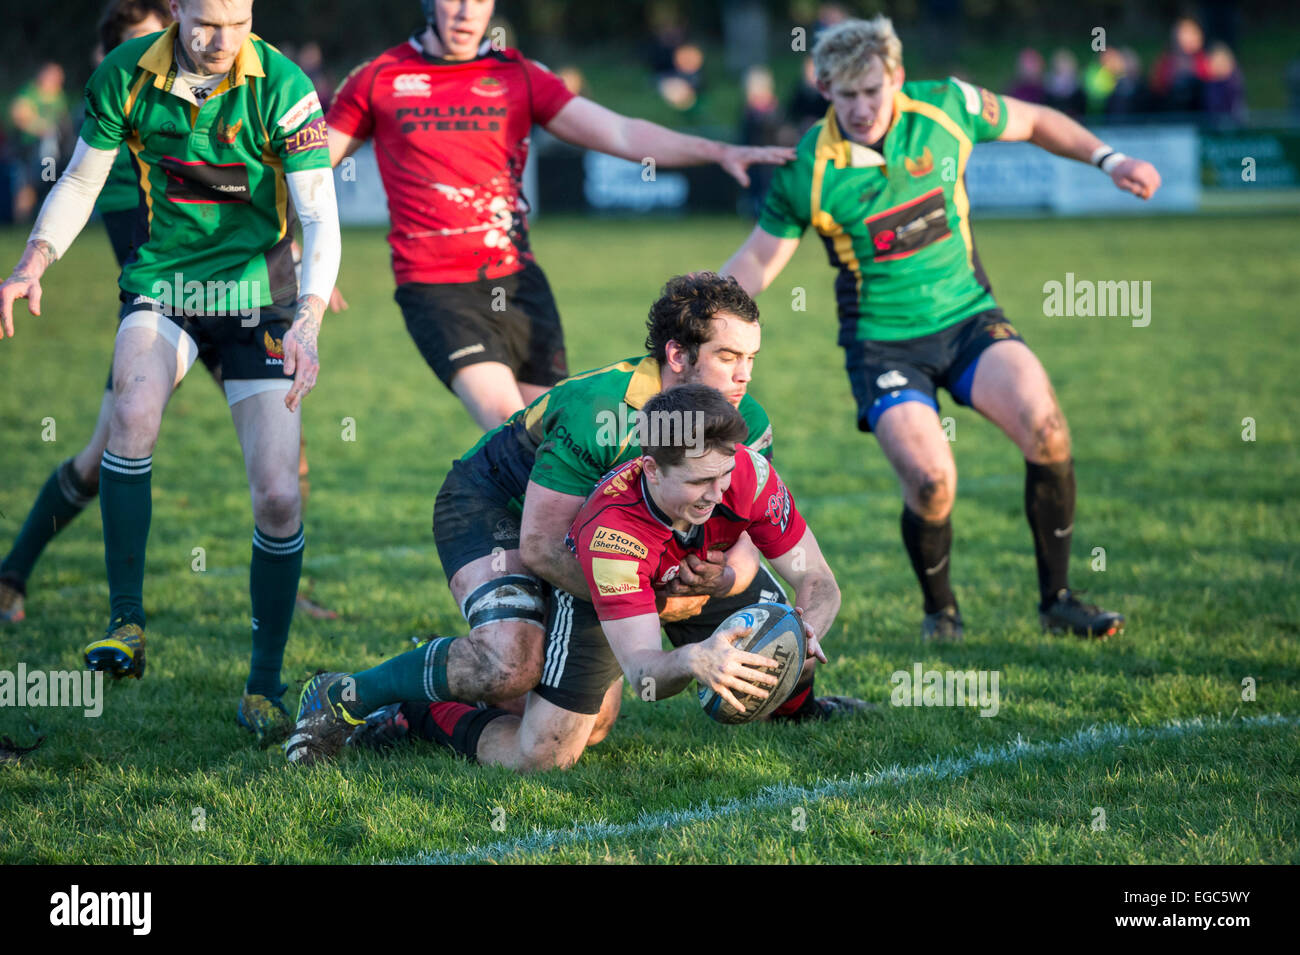 Sherborne rugby player scoring try. Stock Photo